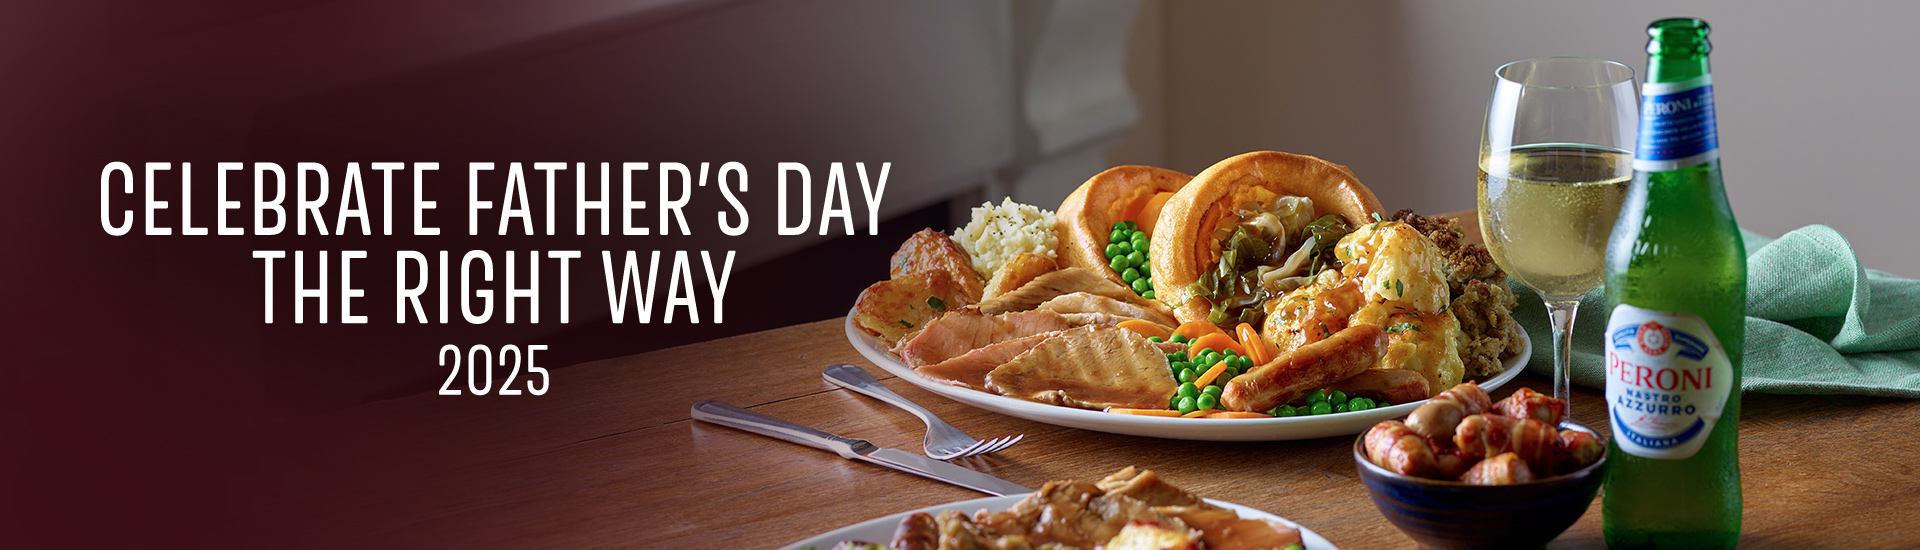 Father’s day carvery in Telford